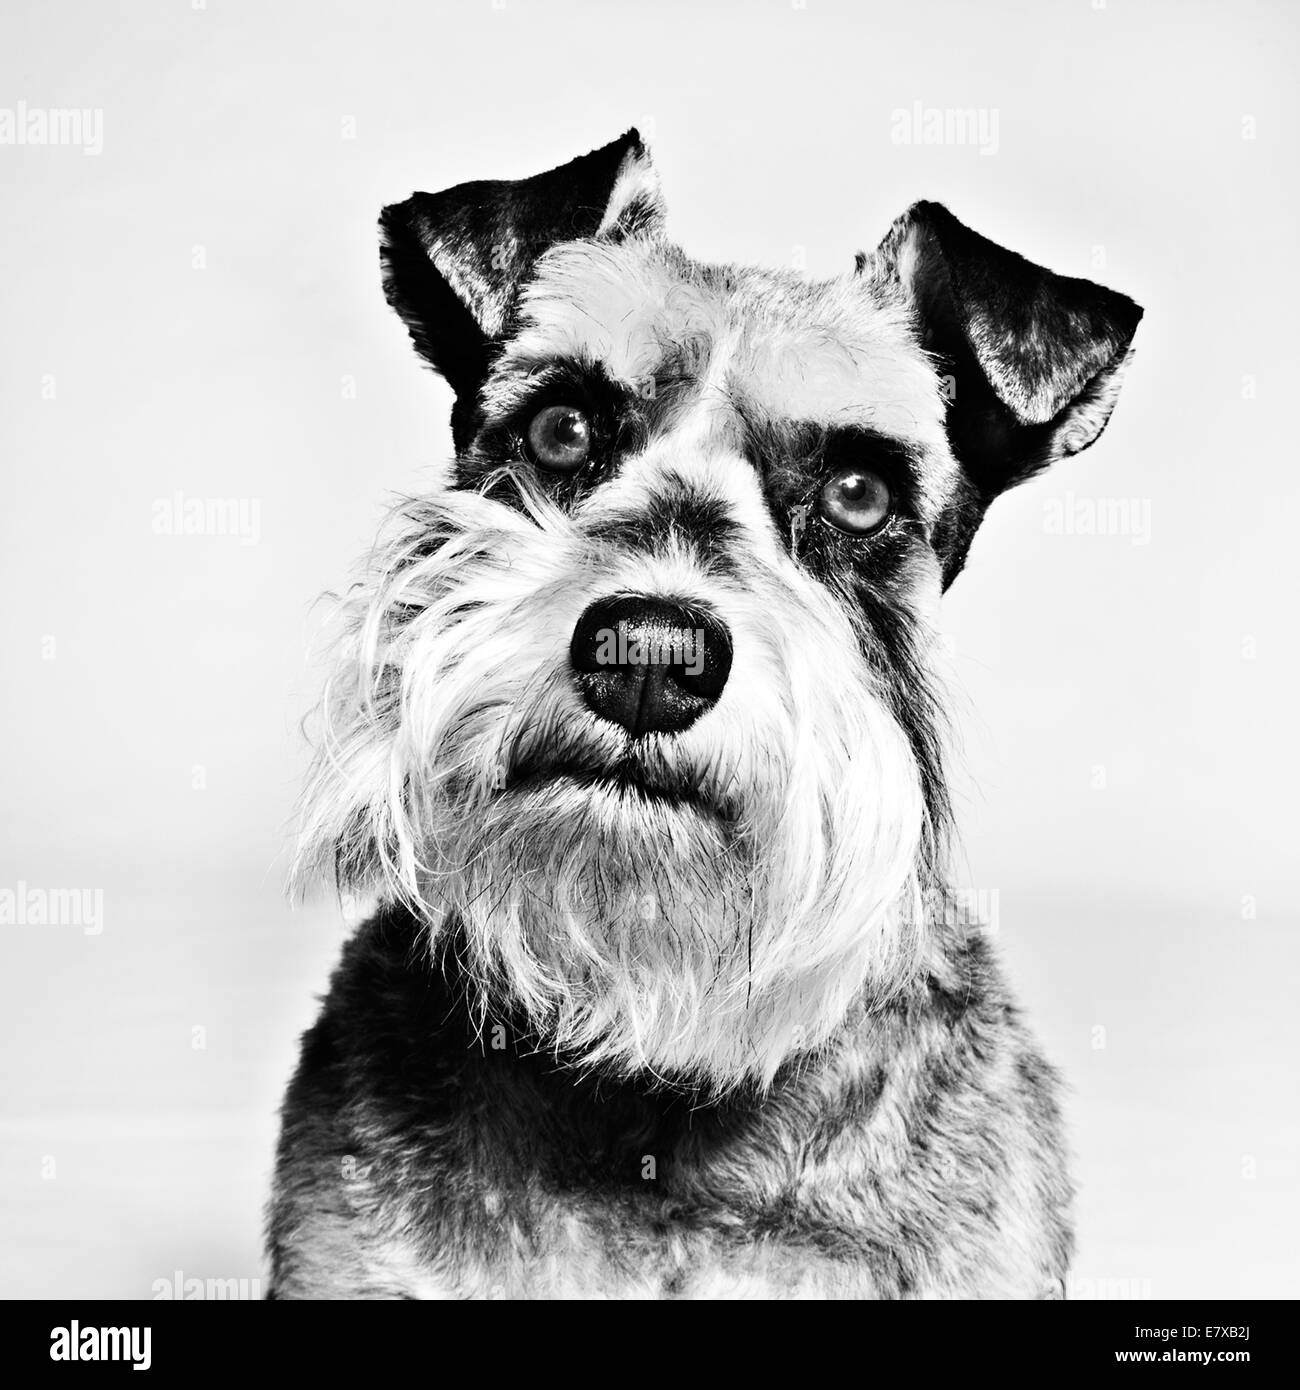 Miniature Schnauzer, this breed of small dog of the Schnauzer type that originated in Germany in the mid-to-late 19th Century. Stock Photo